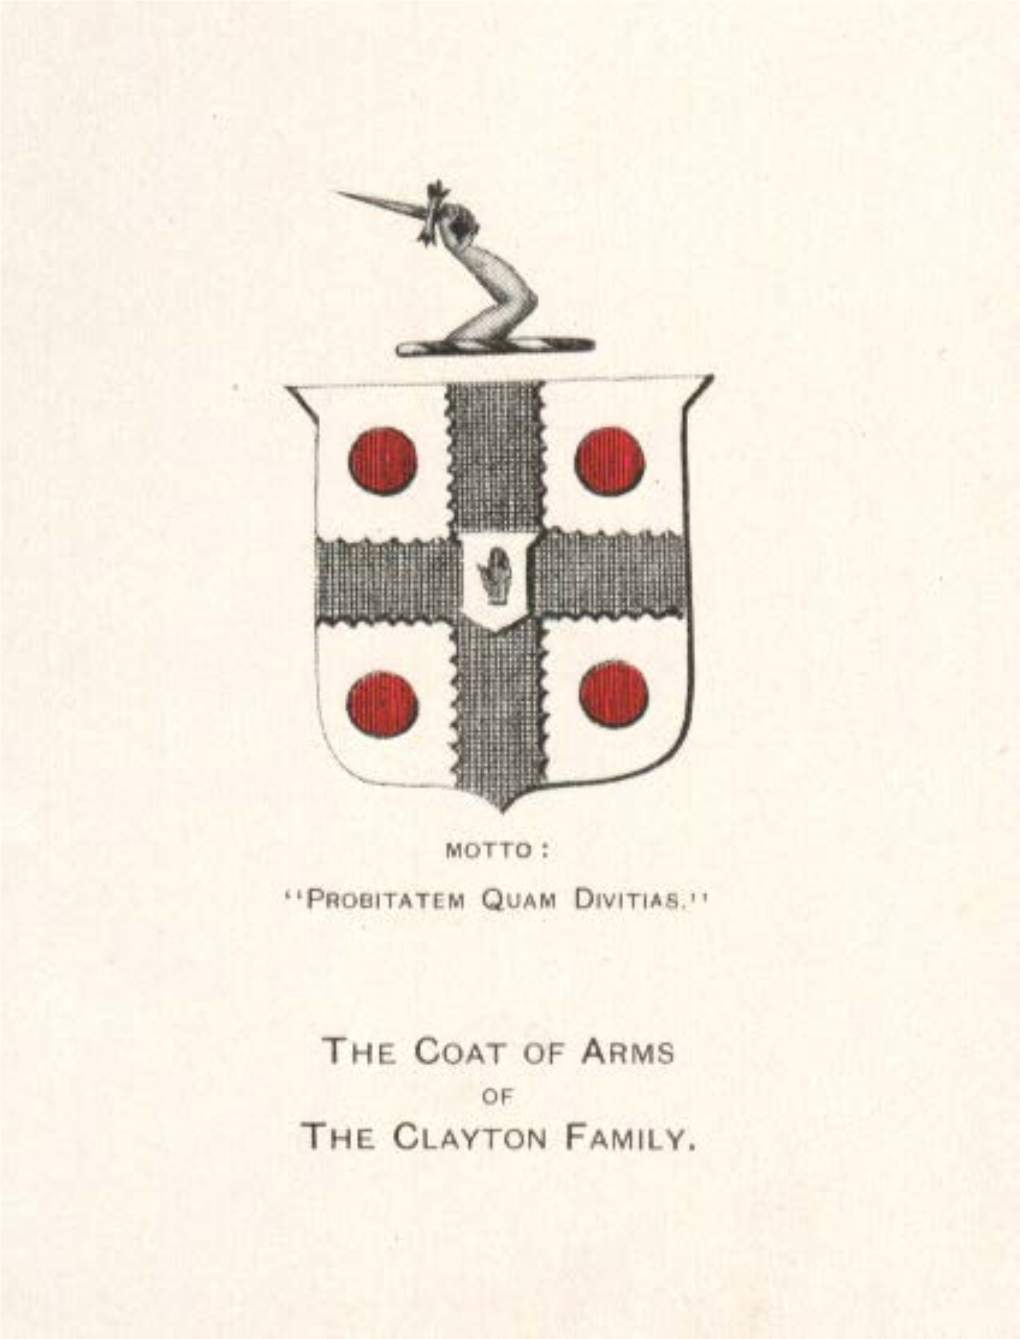 The Coat of Arms the Clayton Family